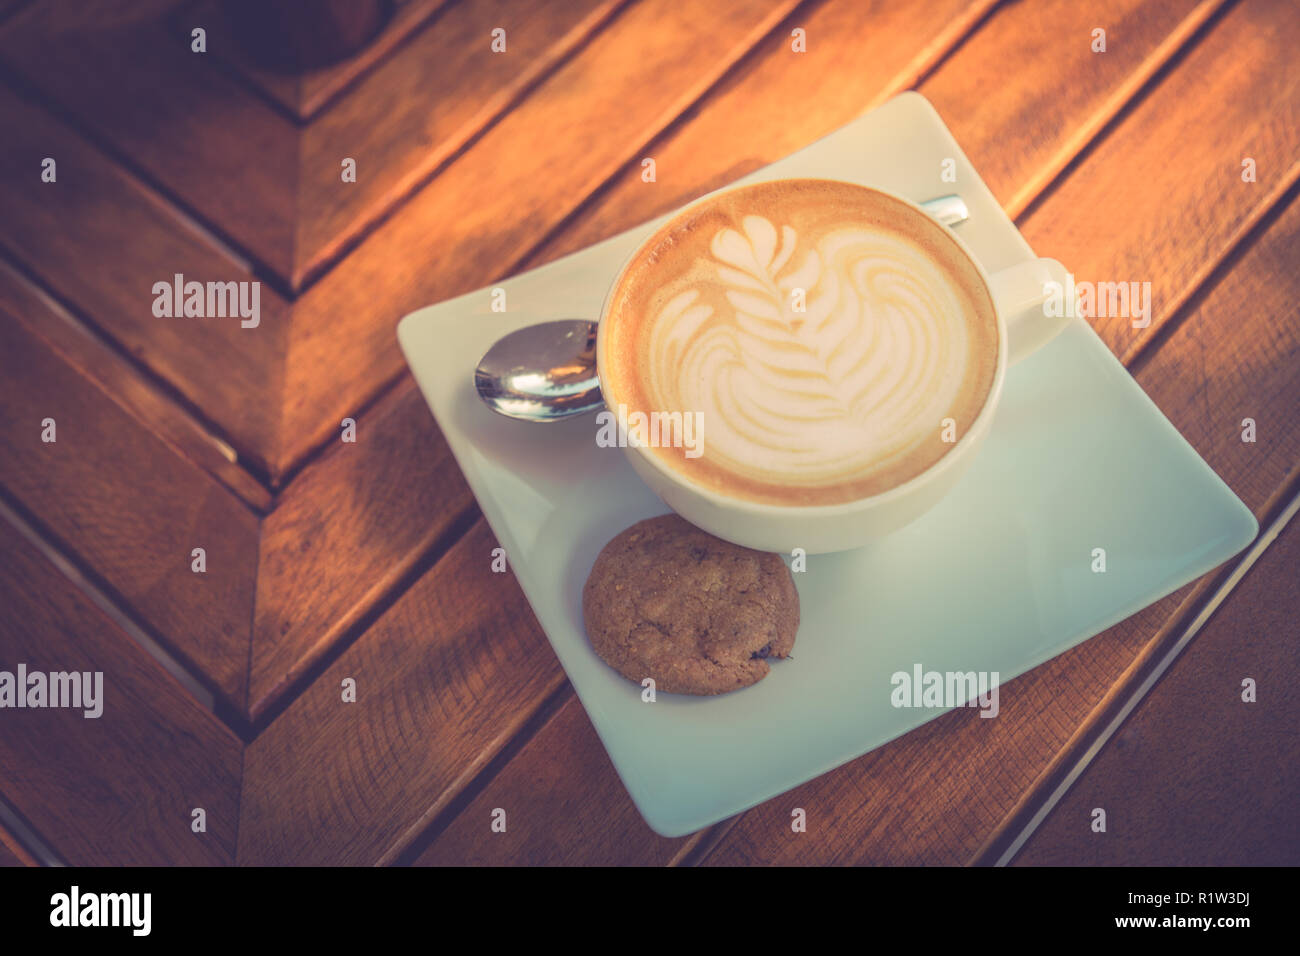 Beautiful morning wooden table top with coffee, latte art and cookie. Start the day, good mood concept. Stock Photo